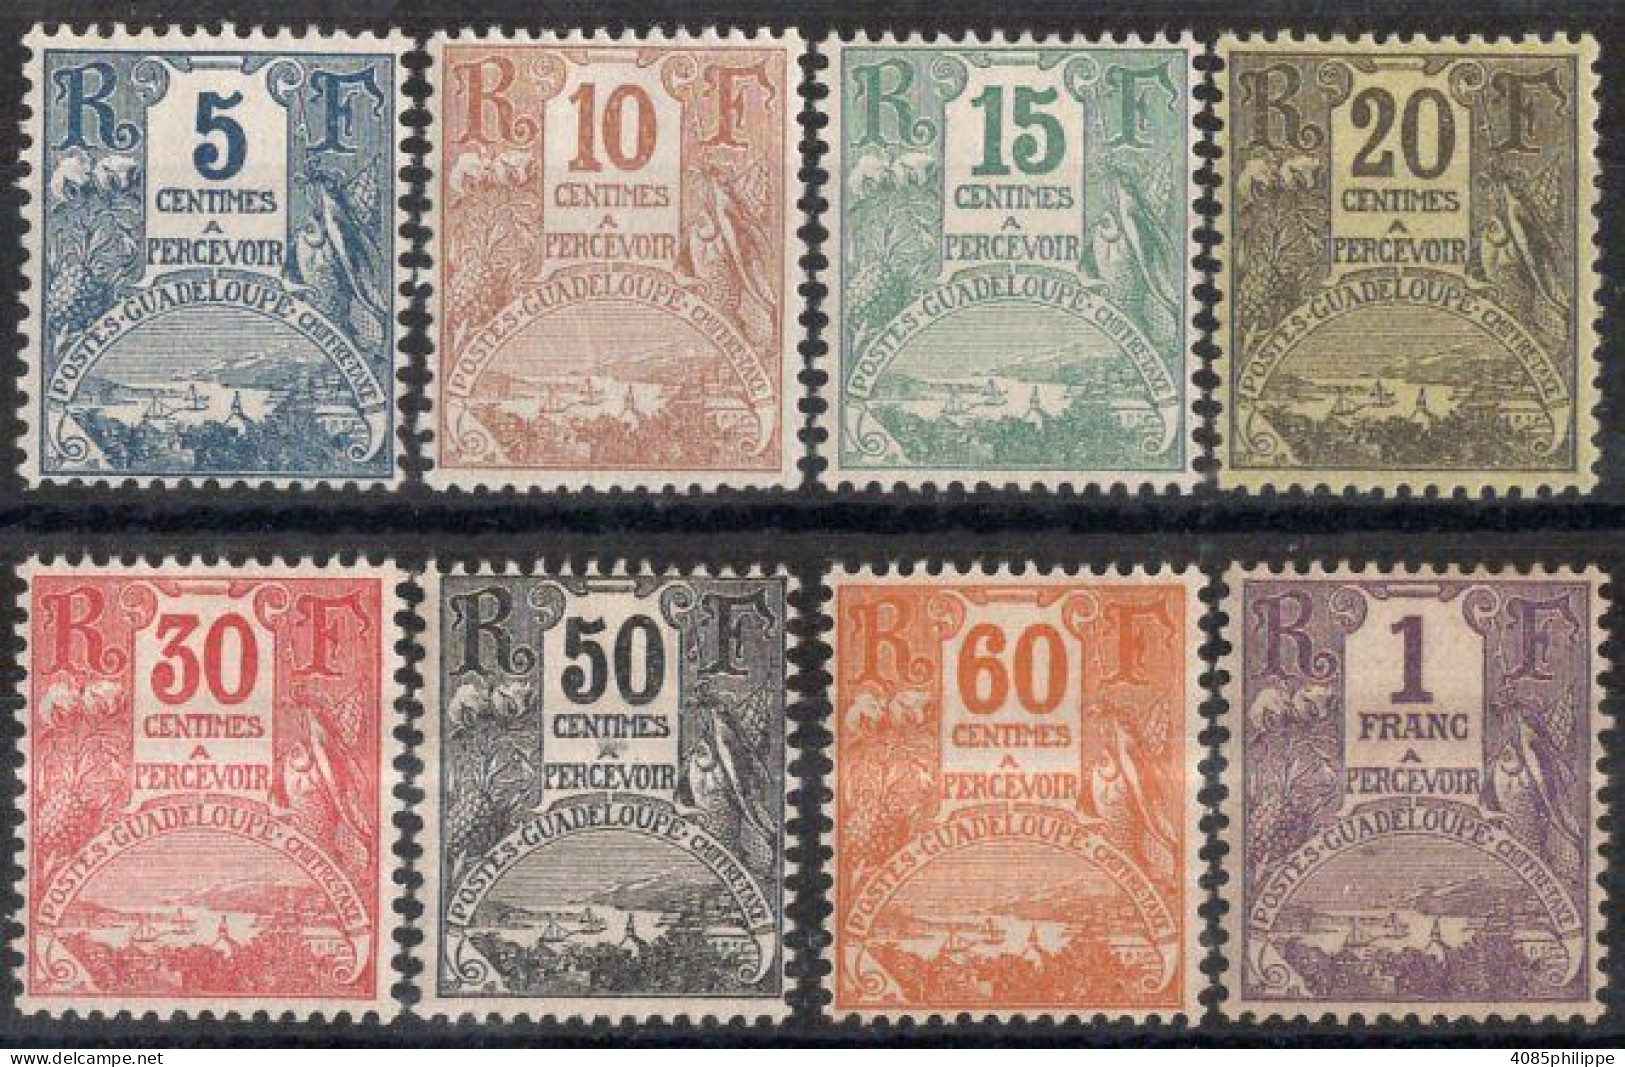 Guadeloupe Timbres-Taxe N°15 à 22* Neufs Charnières TB Cote 19€00 - Strafport